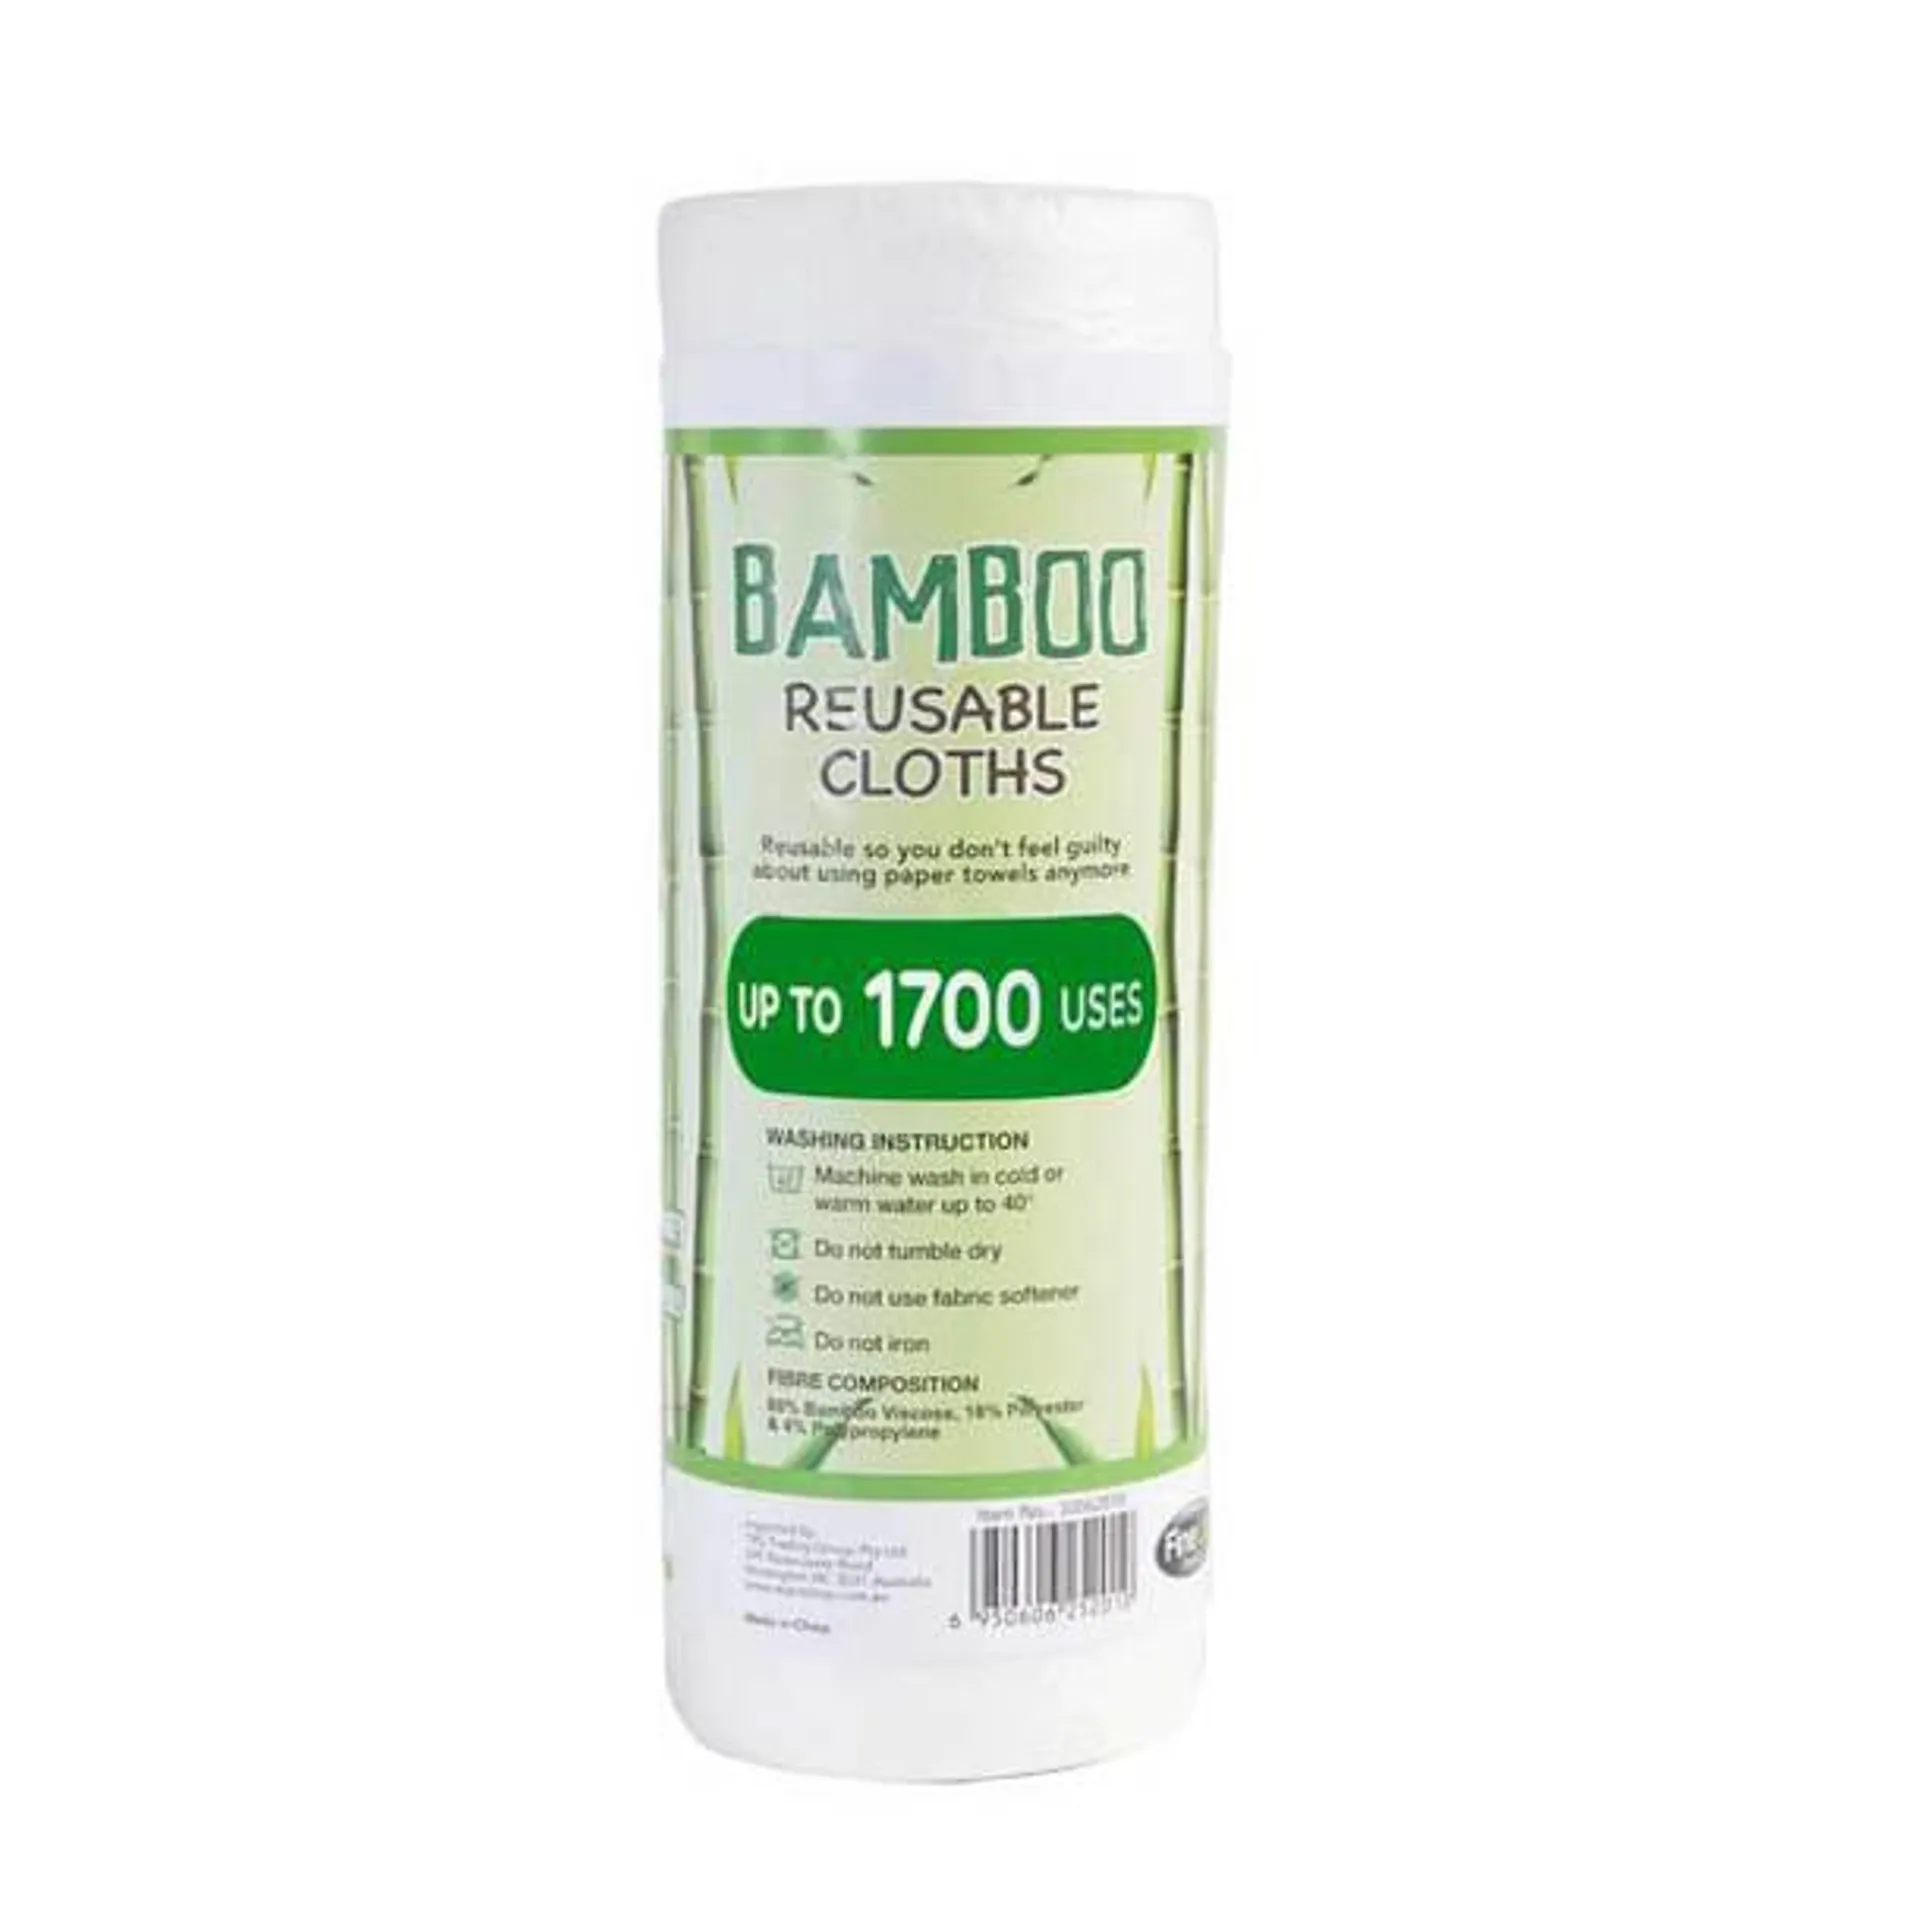 Reusable Bamboo Kitchen Towels +1 FREE